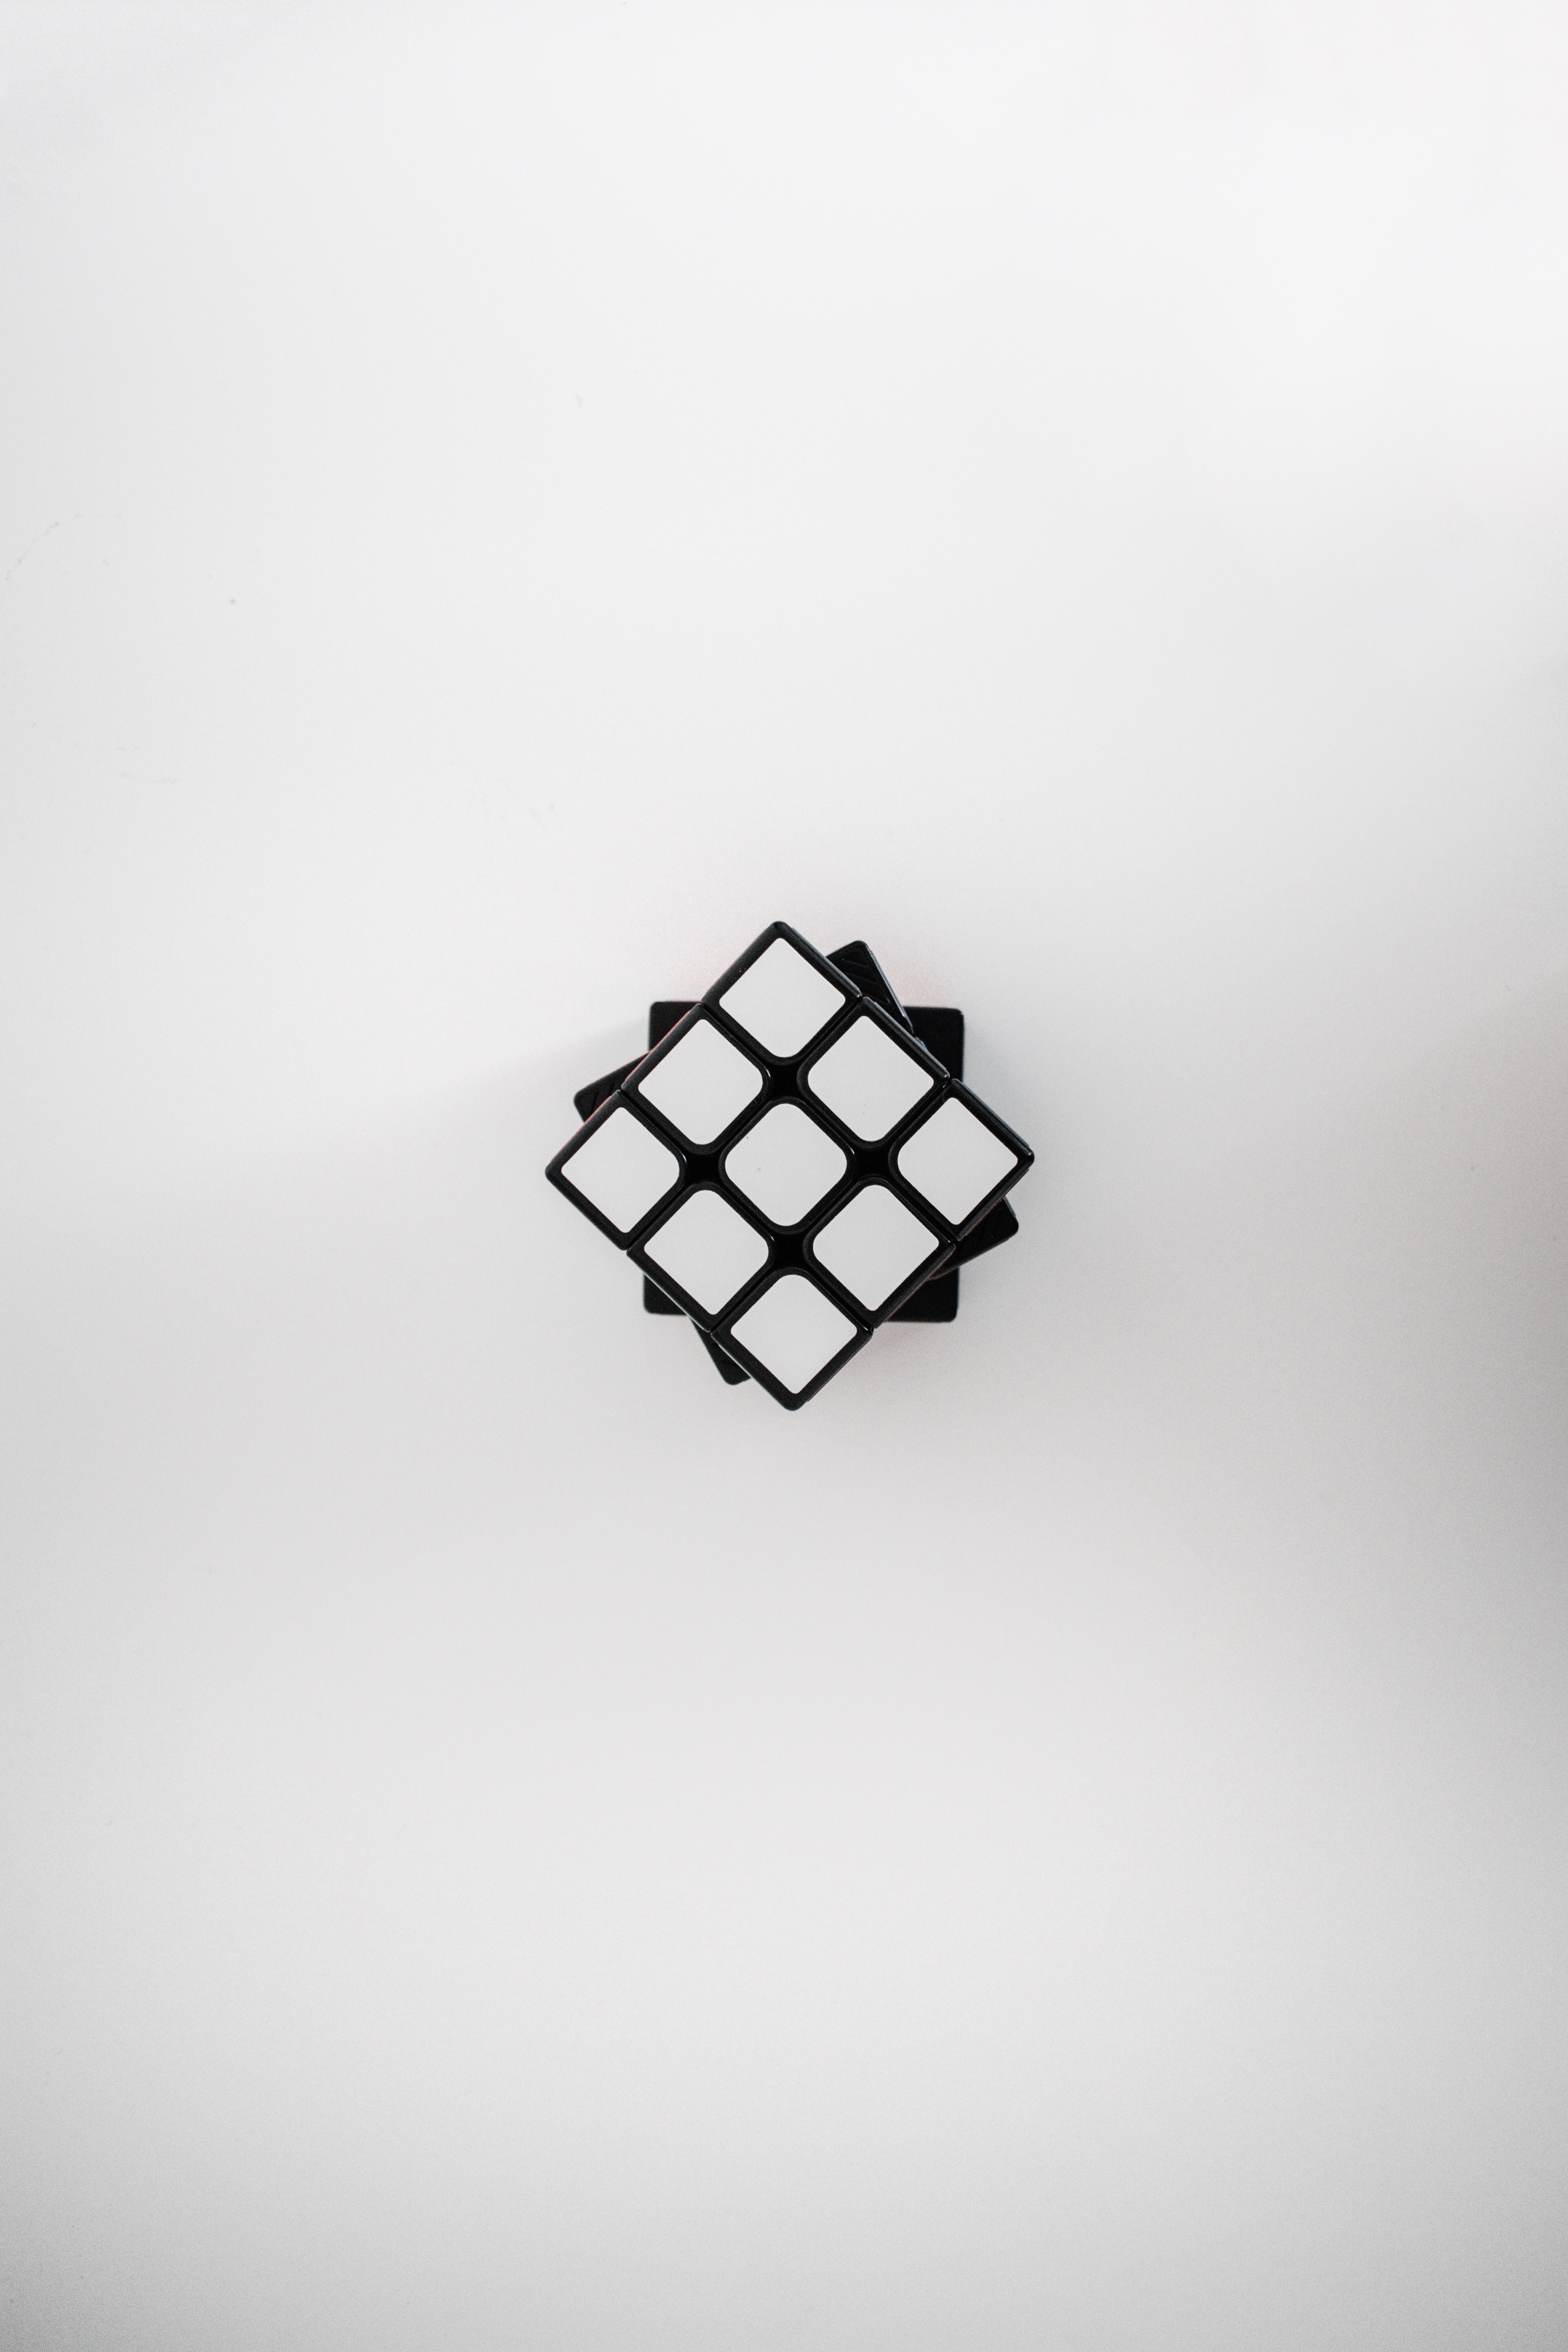 rubik's cube, cube, miscellanea, white, view from above, miscellaneous HD wallpaper